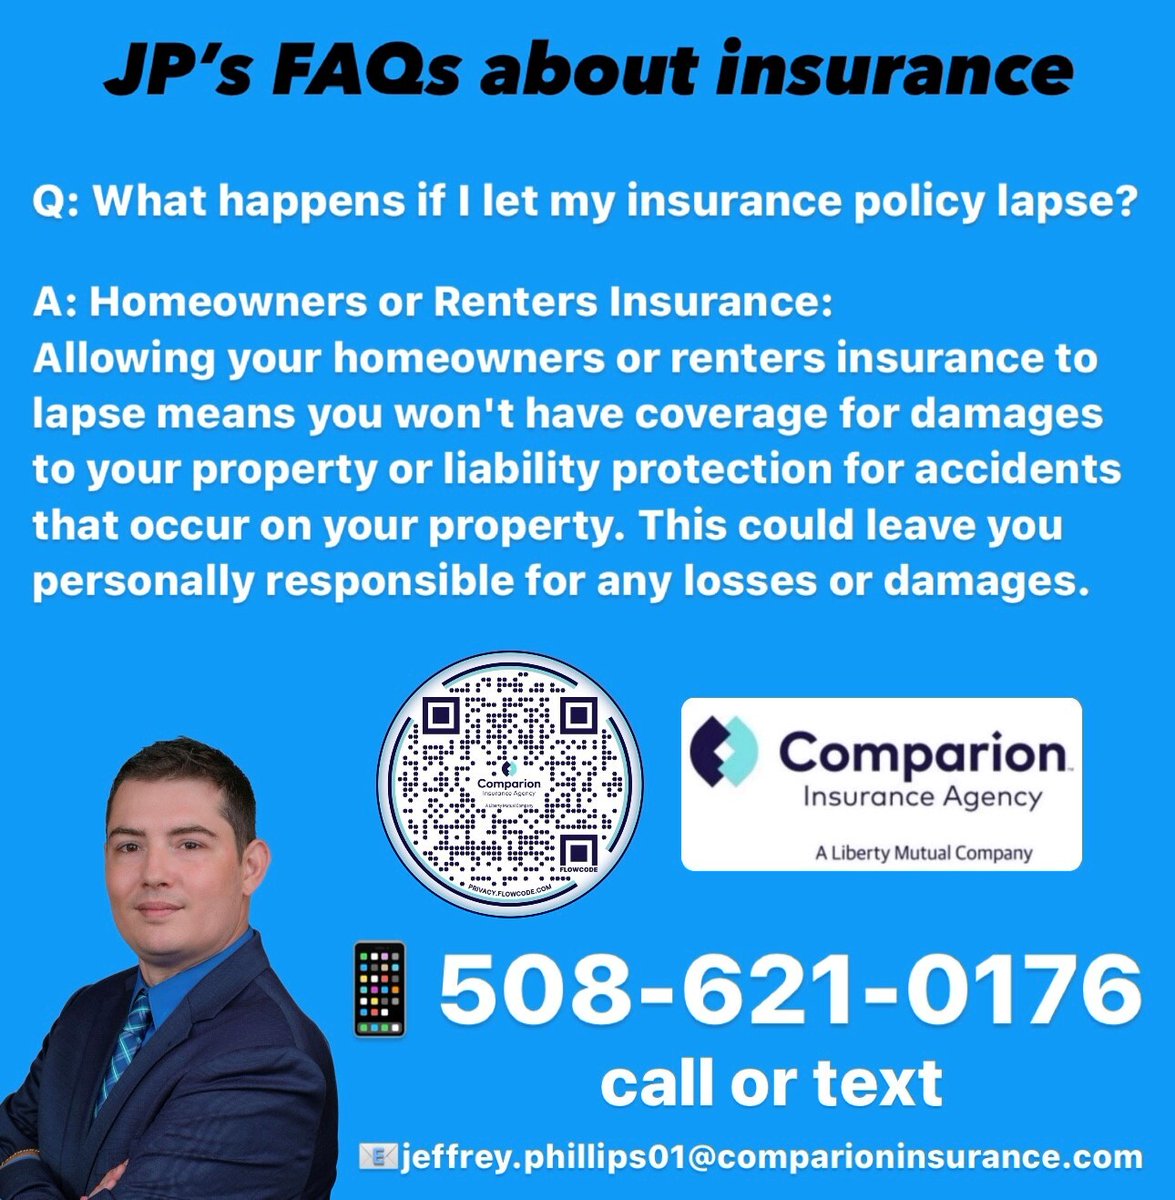 JP's FAQs about insurance I am always here for you when you need me 📲 508-621-0176 📧 jeffrey.phillips01@comparioninsurance.com 💻 bit.ly/3xVlPdM #herewhenyouneedme #localagent #comparioninsurance #trust #inyourcorner #hereforyou